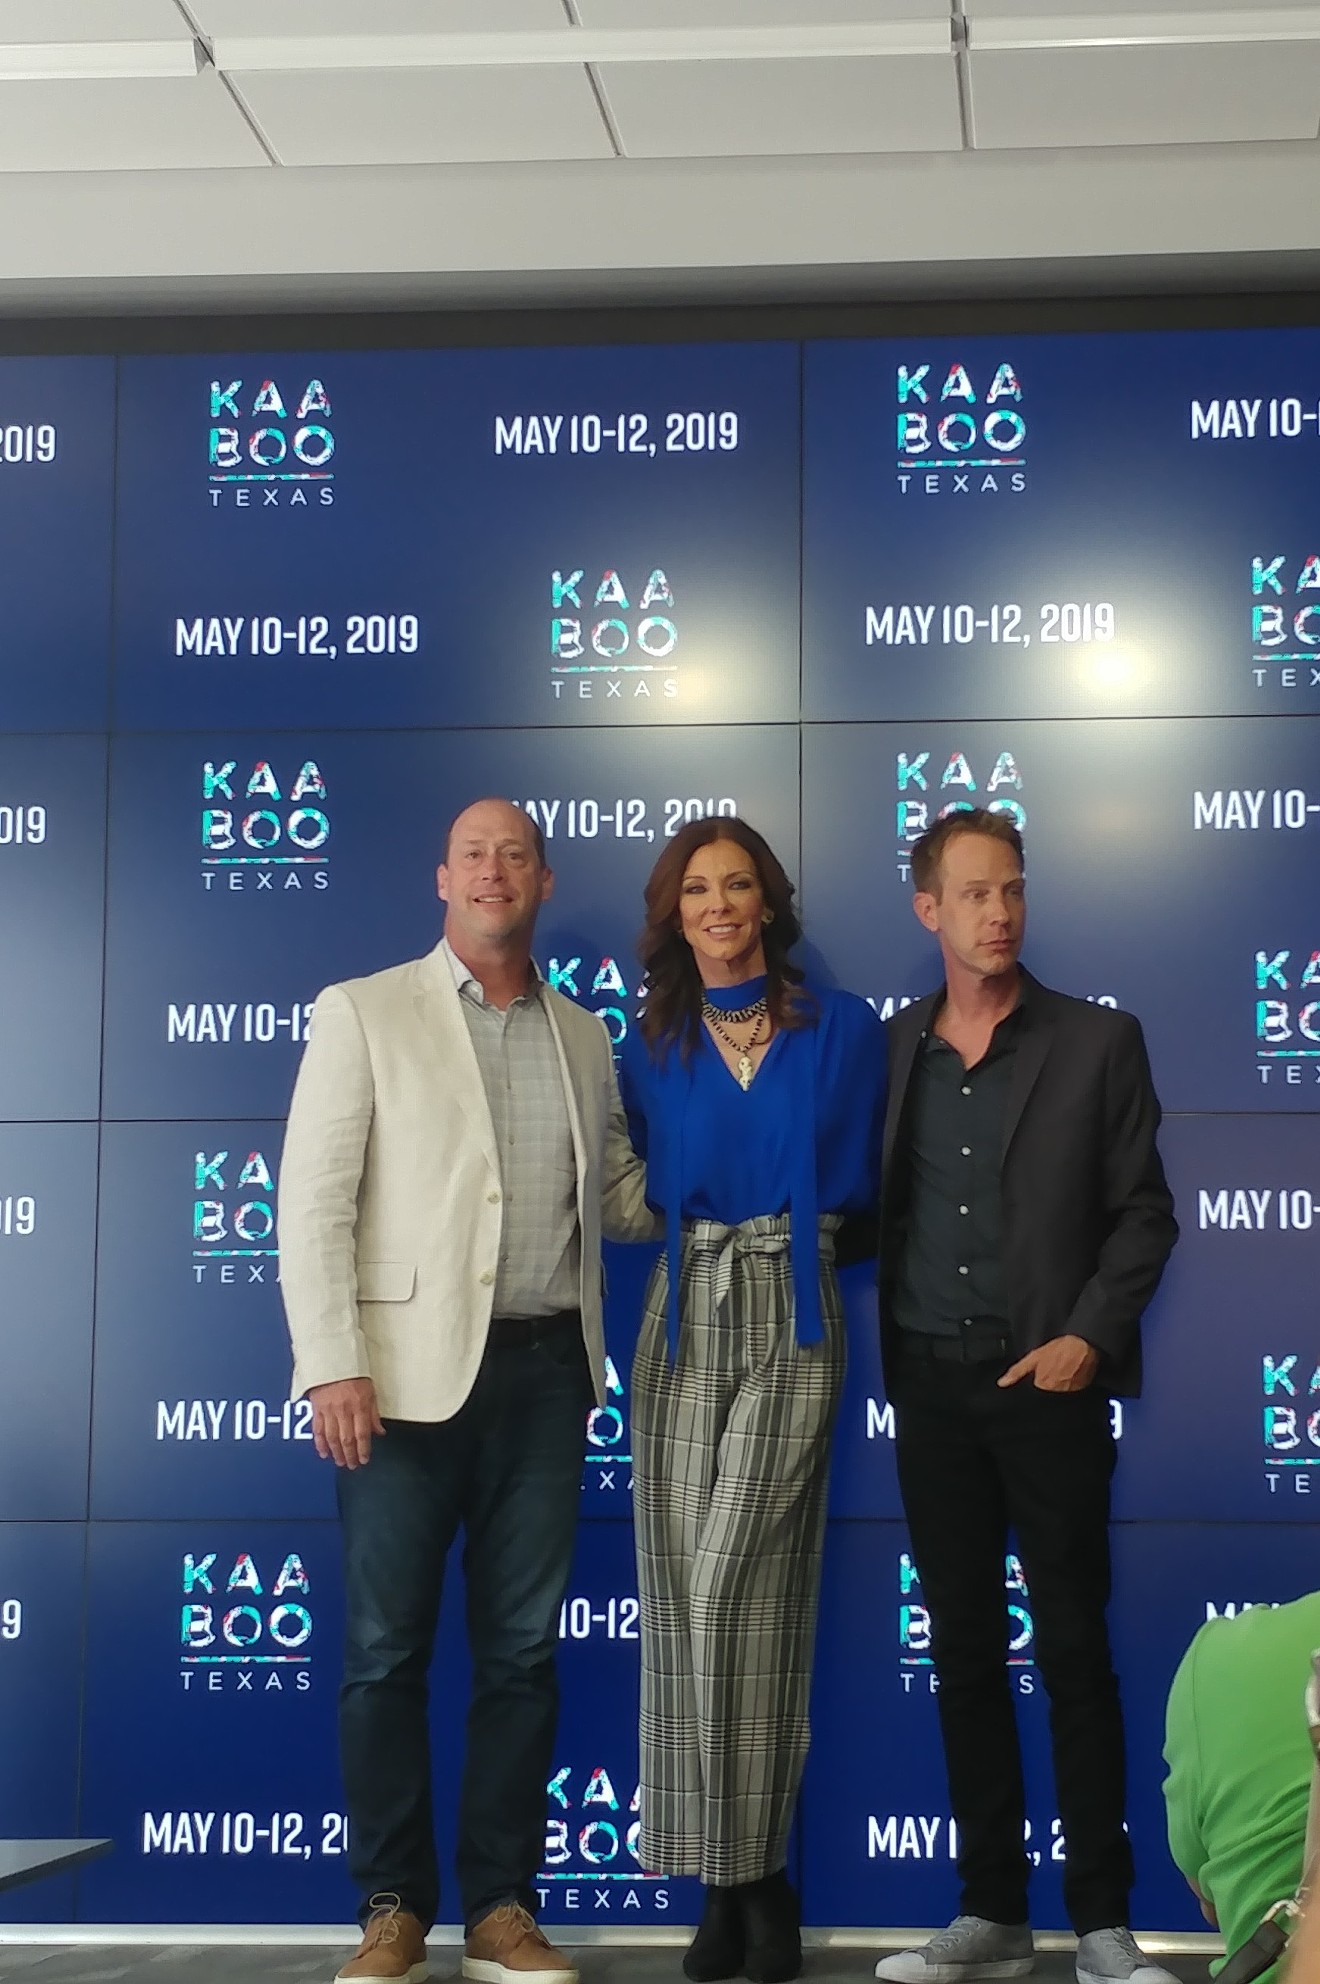 Charlotte Jones, executive vice president of the Dallas Cowboys, announced that KAABOO Festival was coming to Texas.